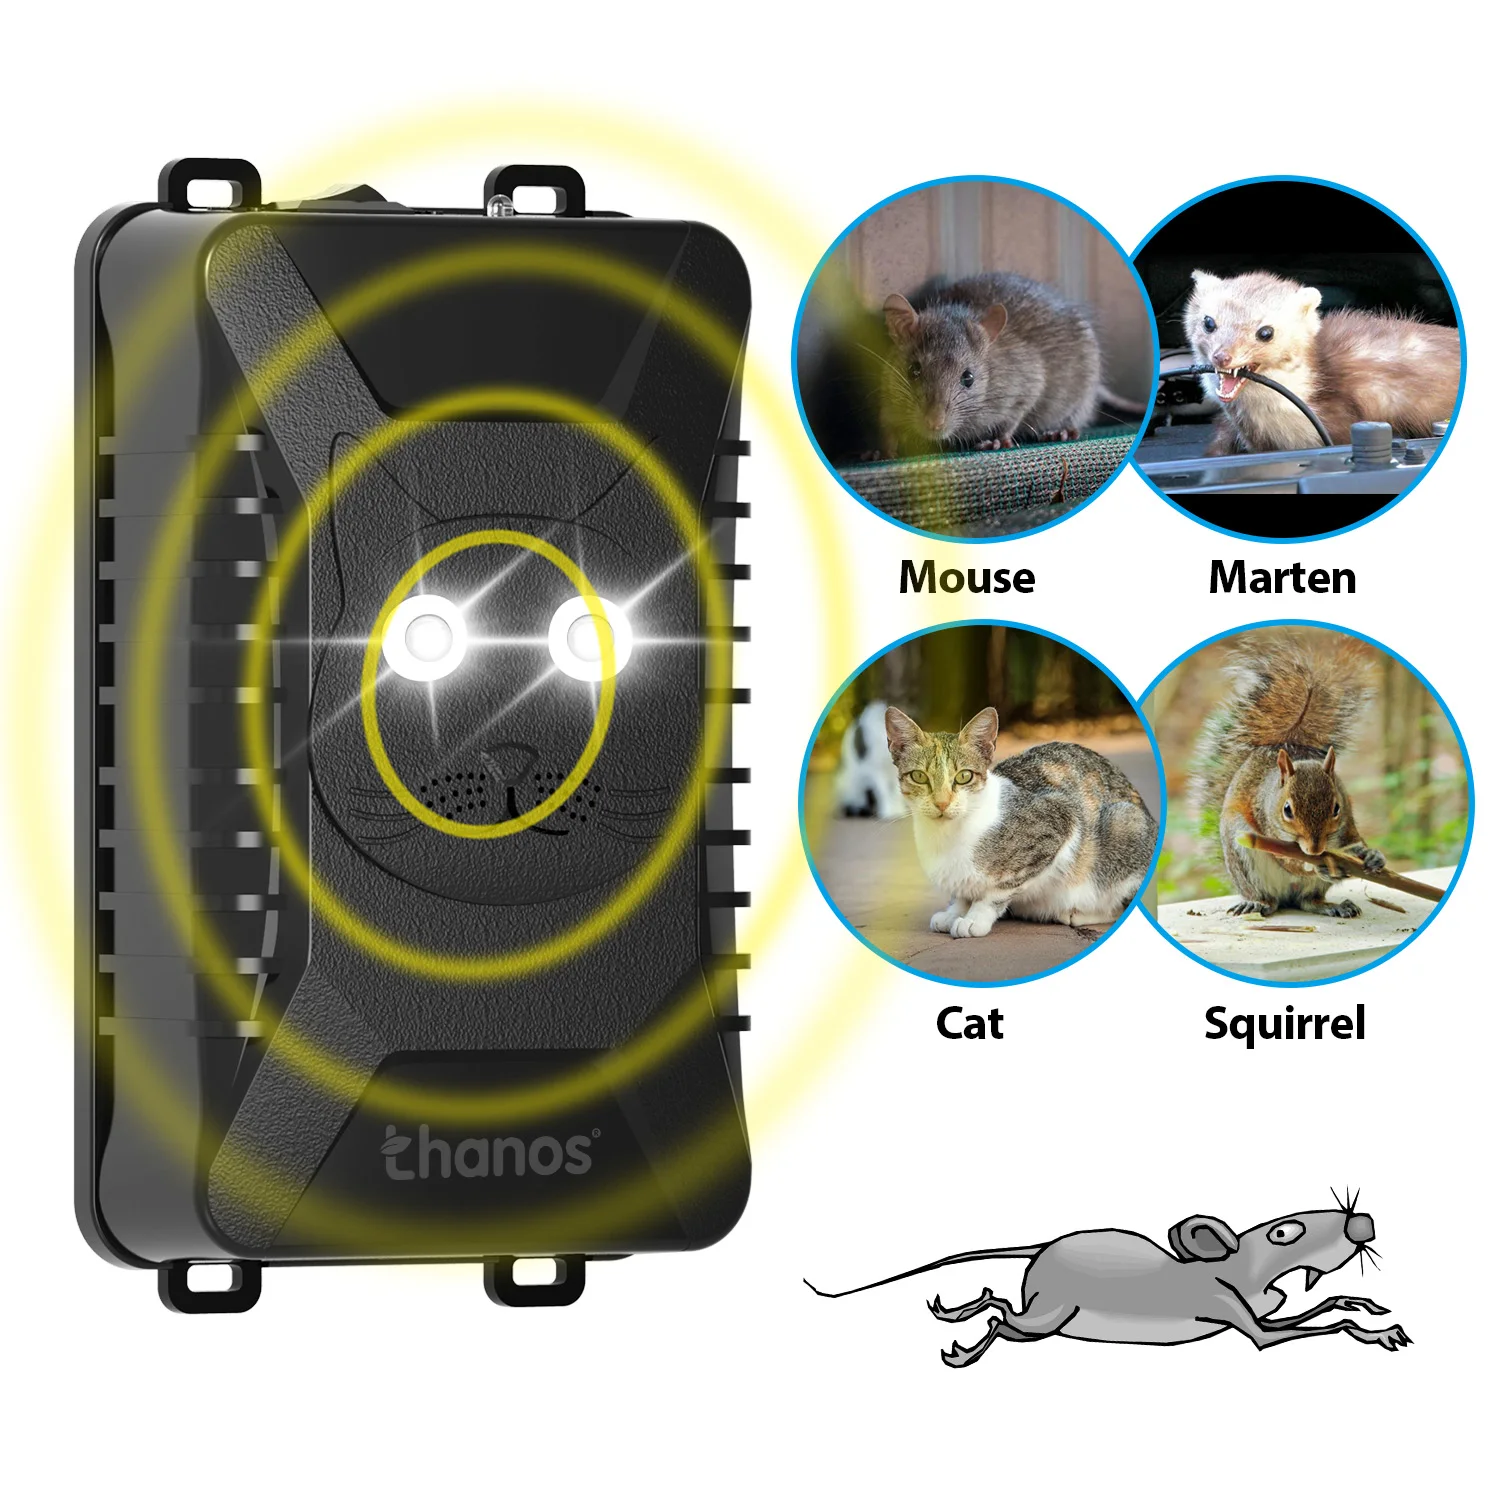 

Thanos Vehicle Under Hood Animal Repeller Battery Operated Rodent Expeller Ultrasonic Control Deterrent Mice Mouse Marten Rat